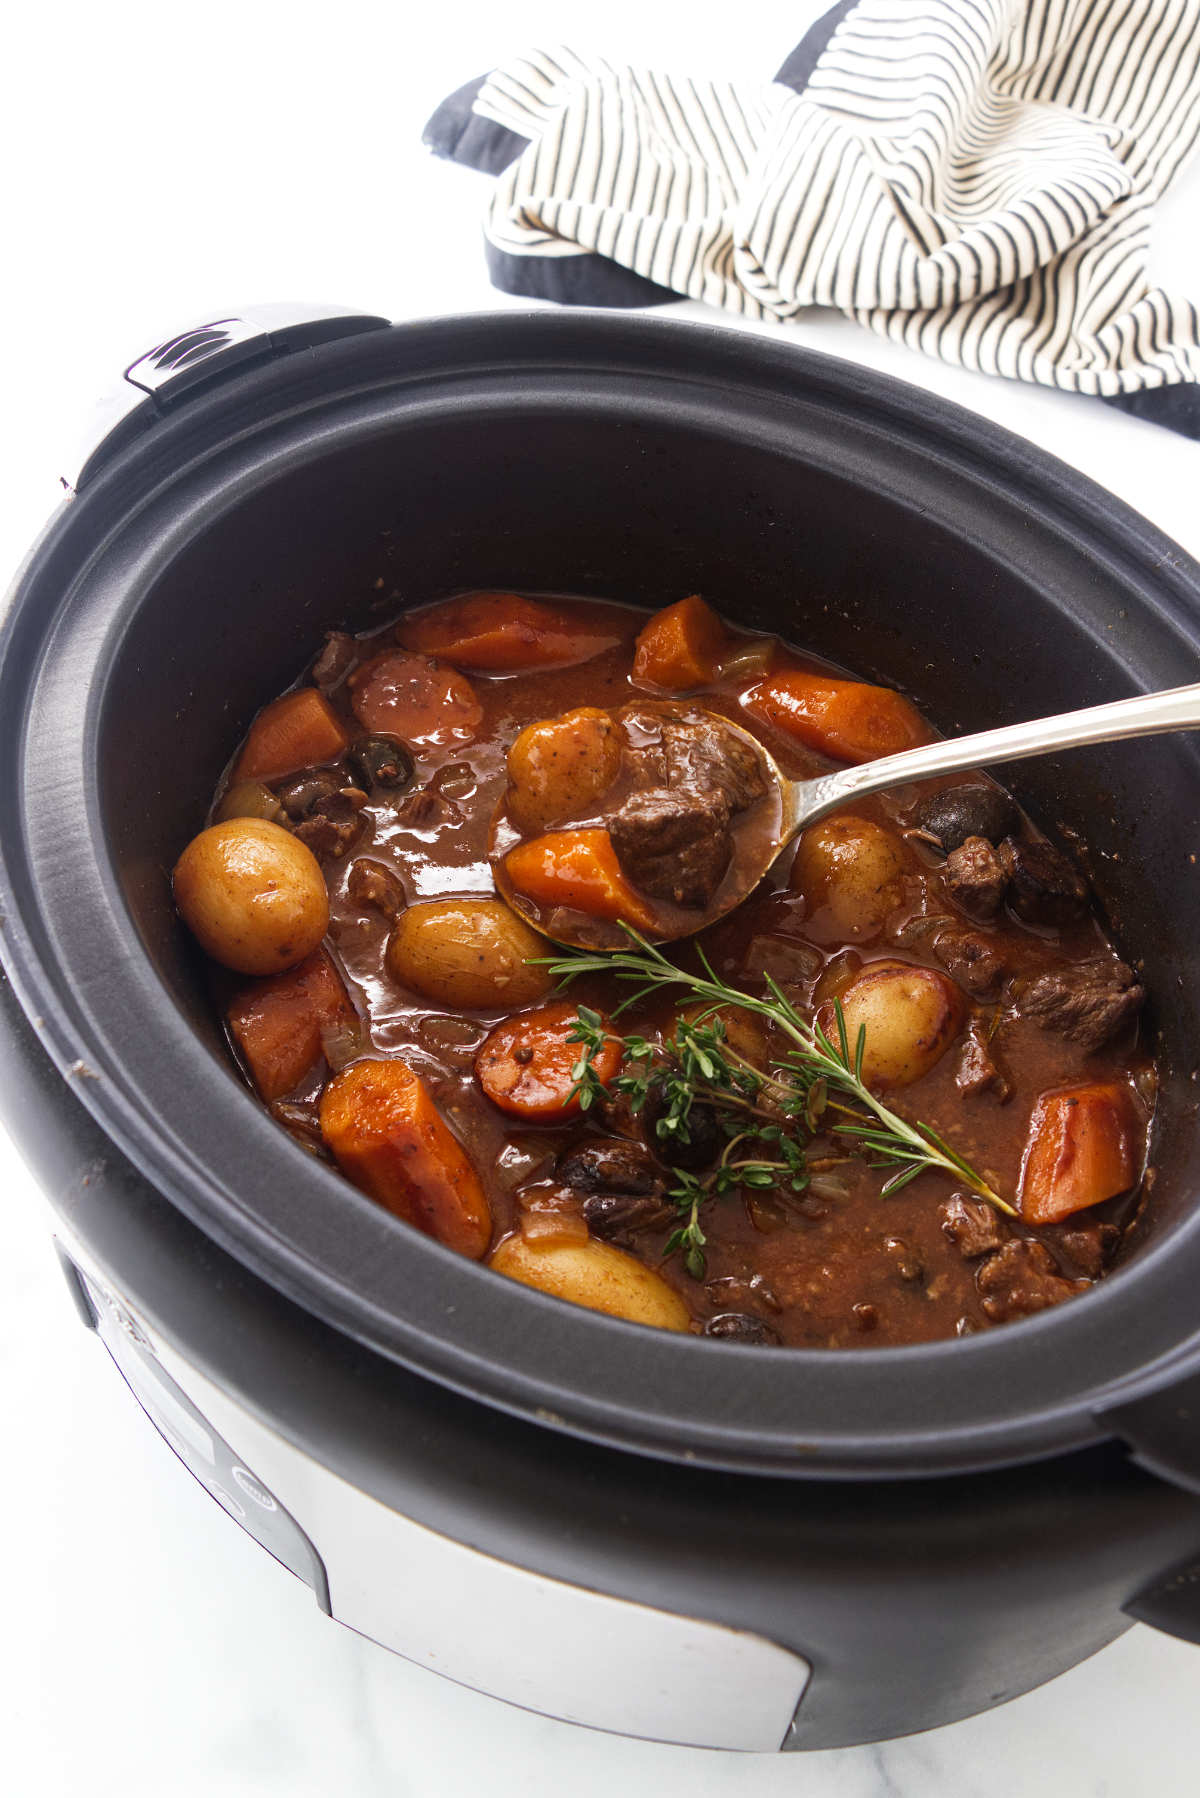 Best slow cooker: for stews, soups and more